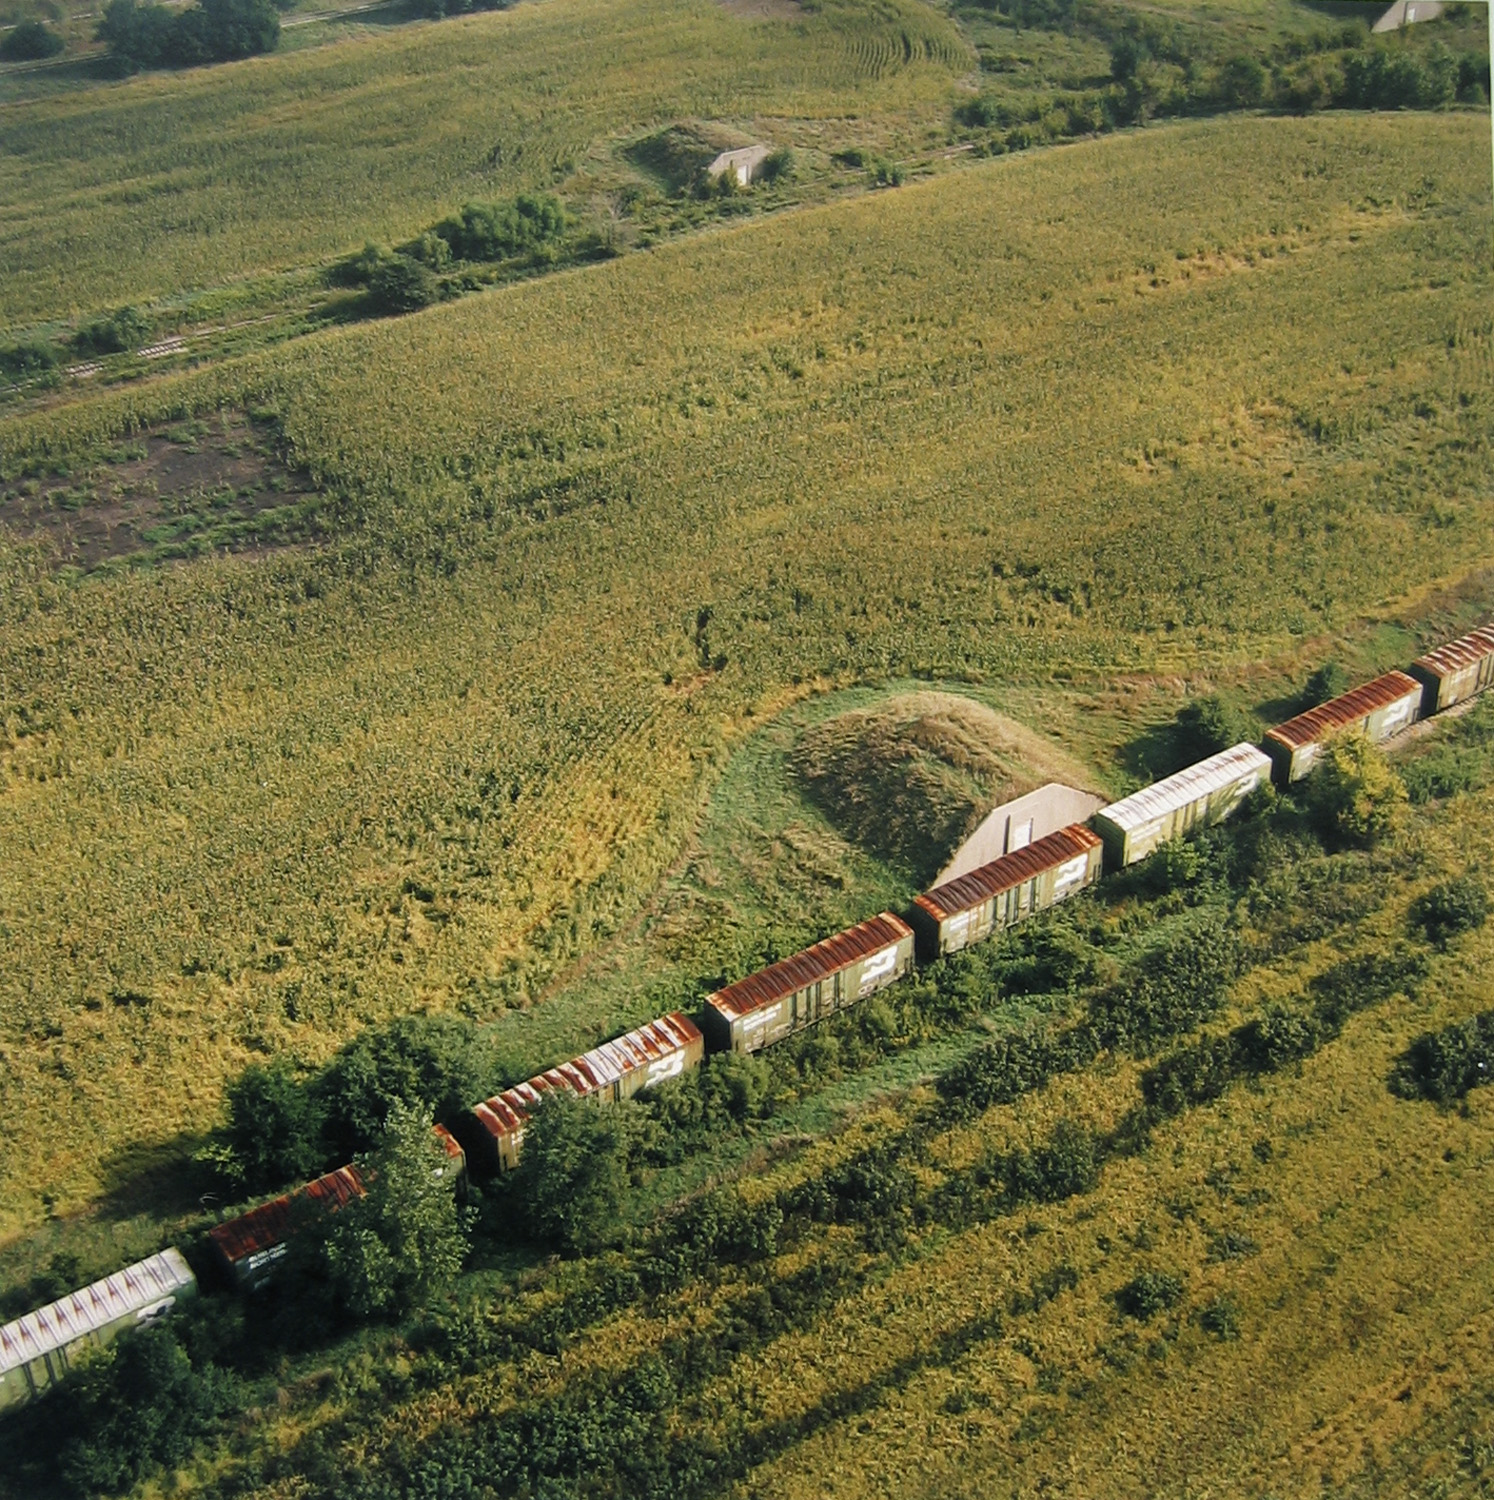 Abandoned bunkers and train, now a cornfield, September 1995